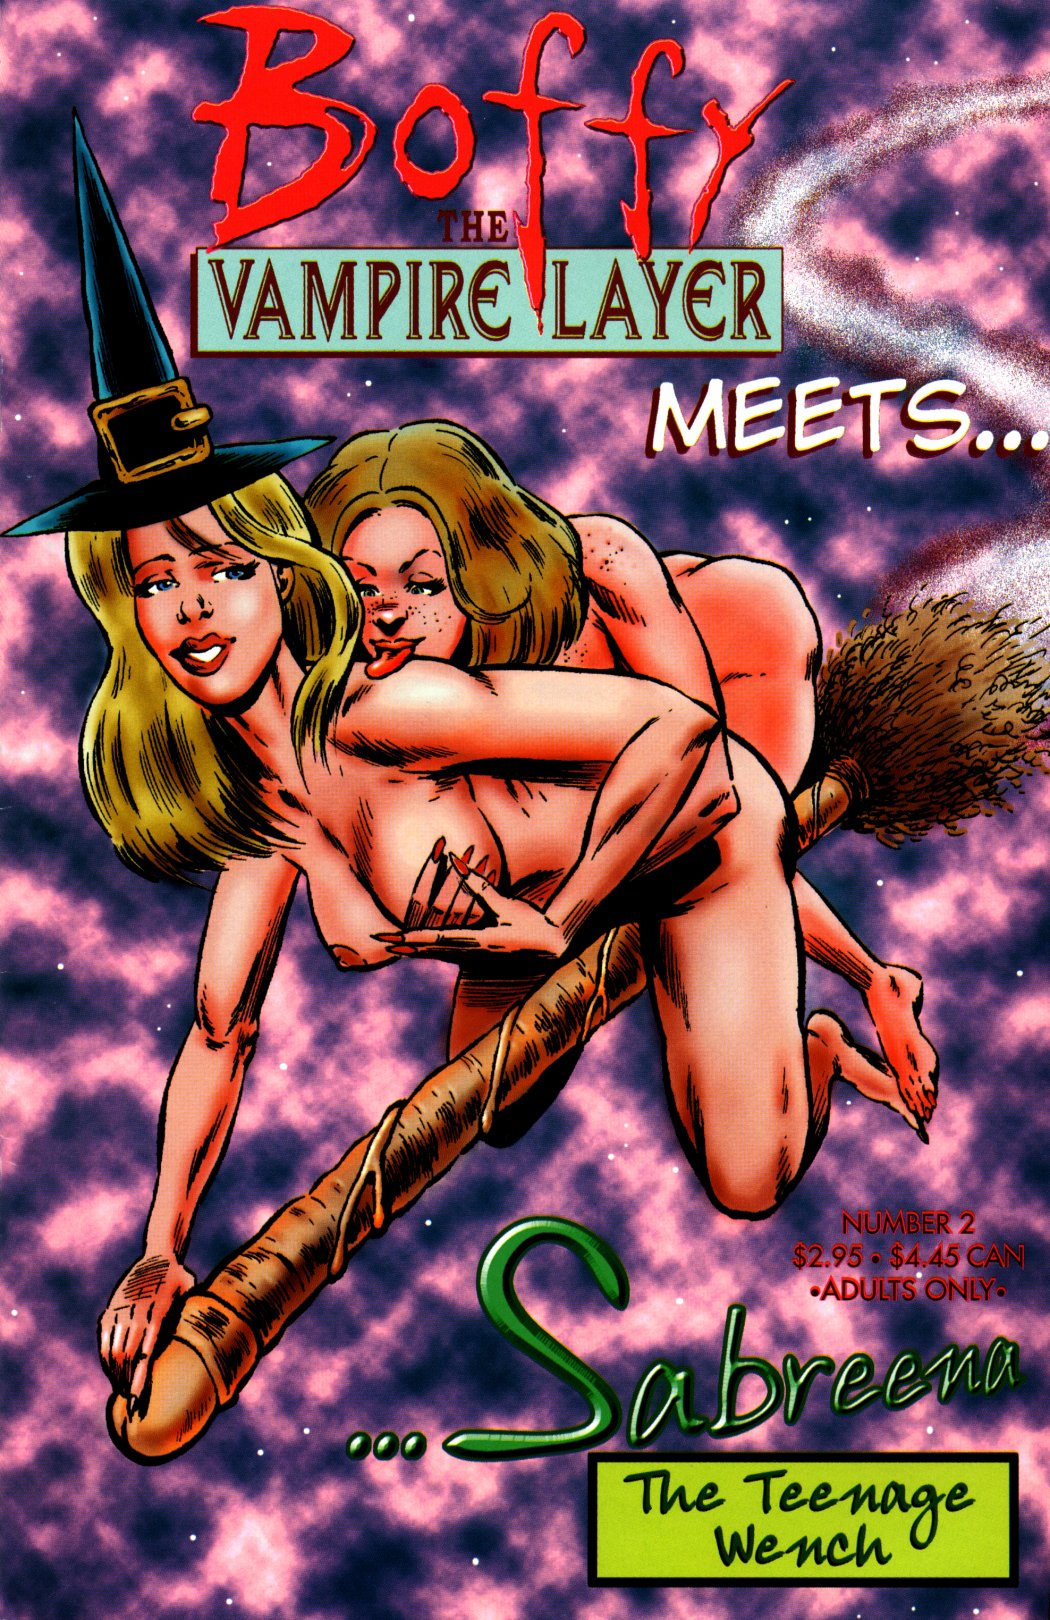 [Bruce Mccorkindale] Boffy The Vampire Layer #2 (Buffy the Vampire Slayer, Sabrina the Teenage Witch) 